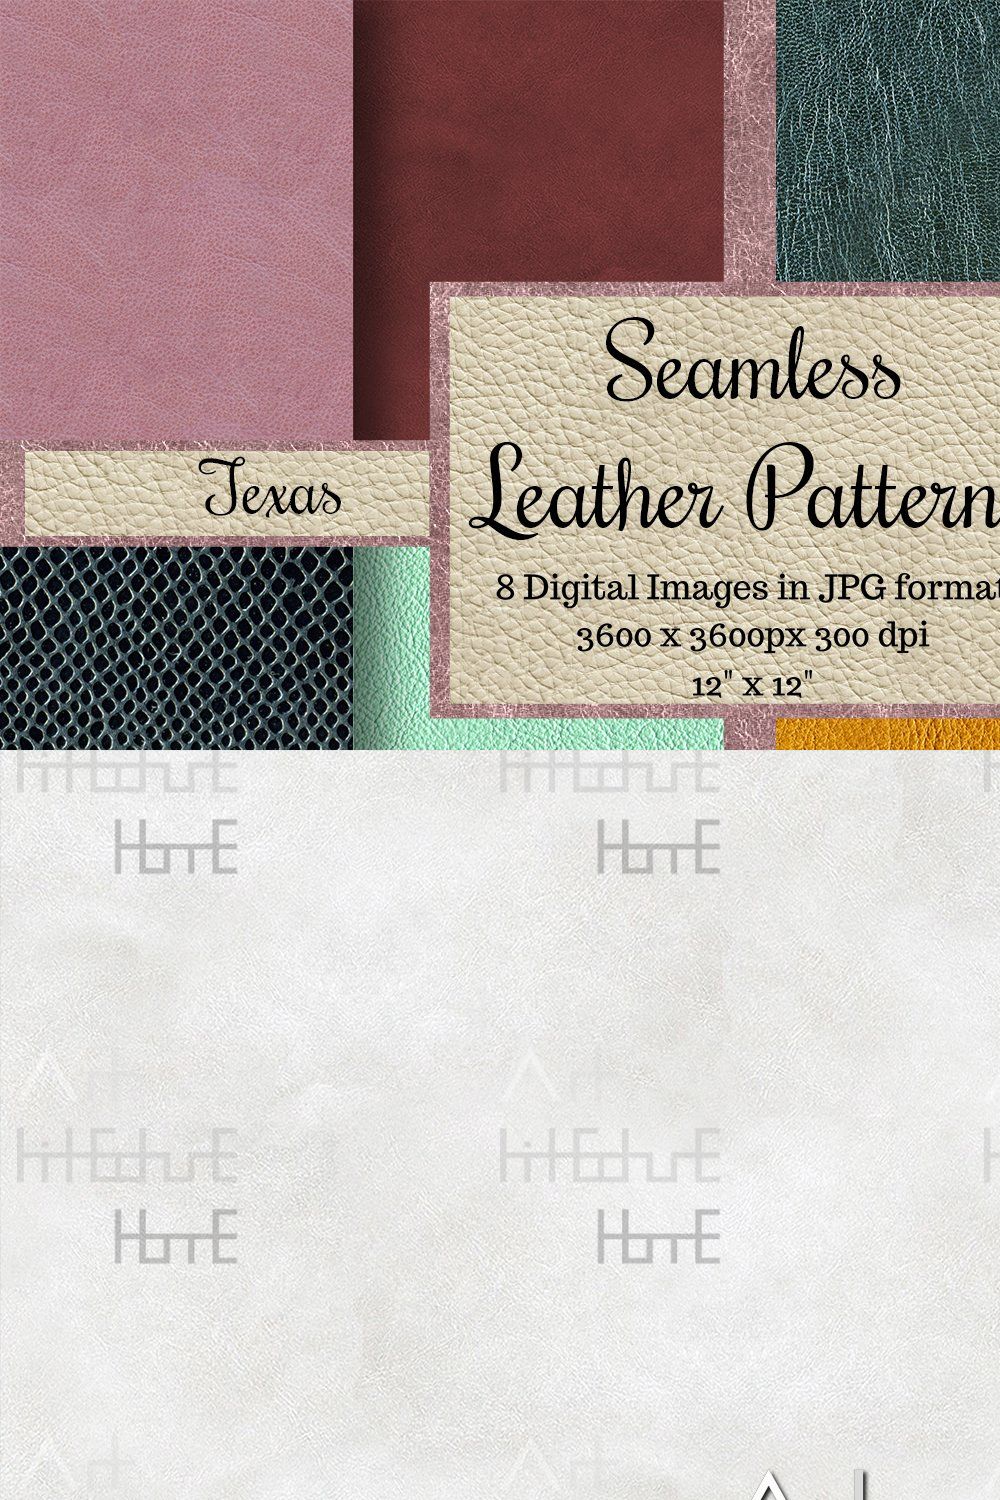 Seamless Leather Patterns - Texas pinterest preview image.